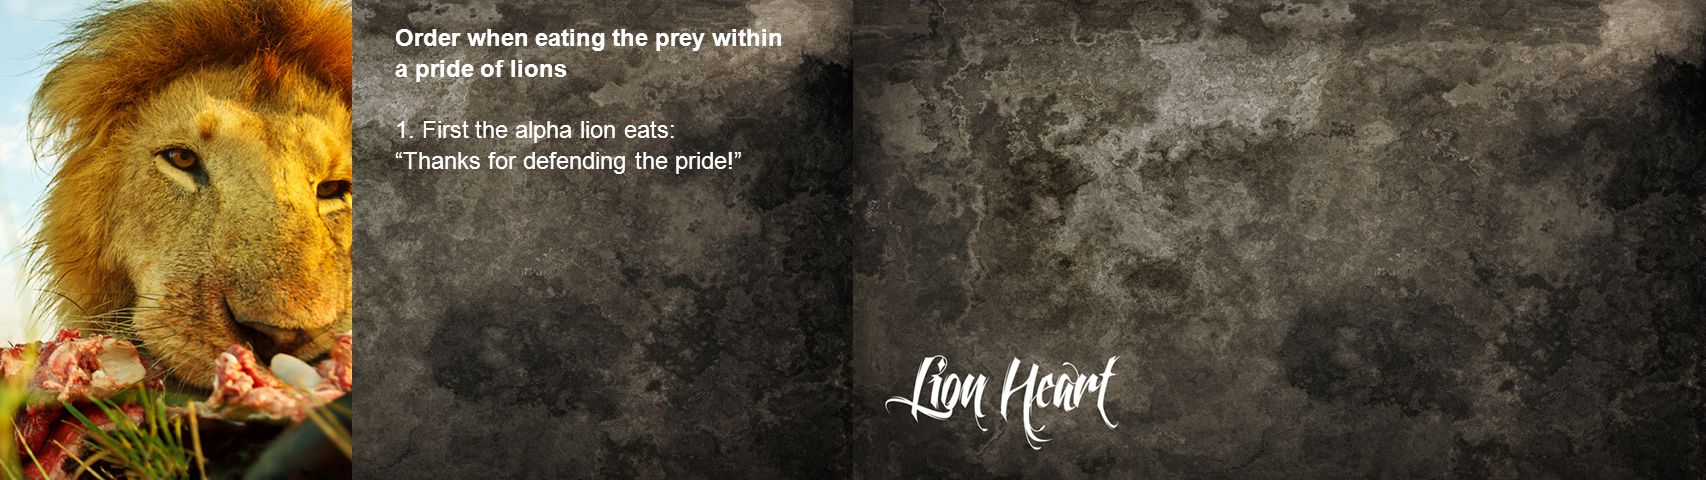 Order when eating the prey within a pride of lions 1.